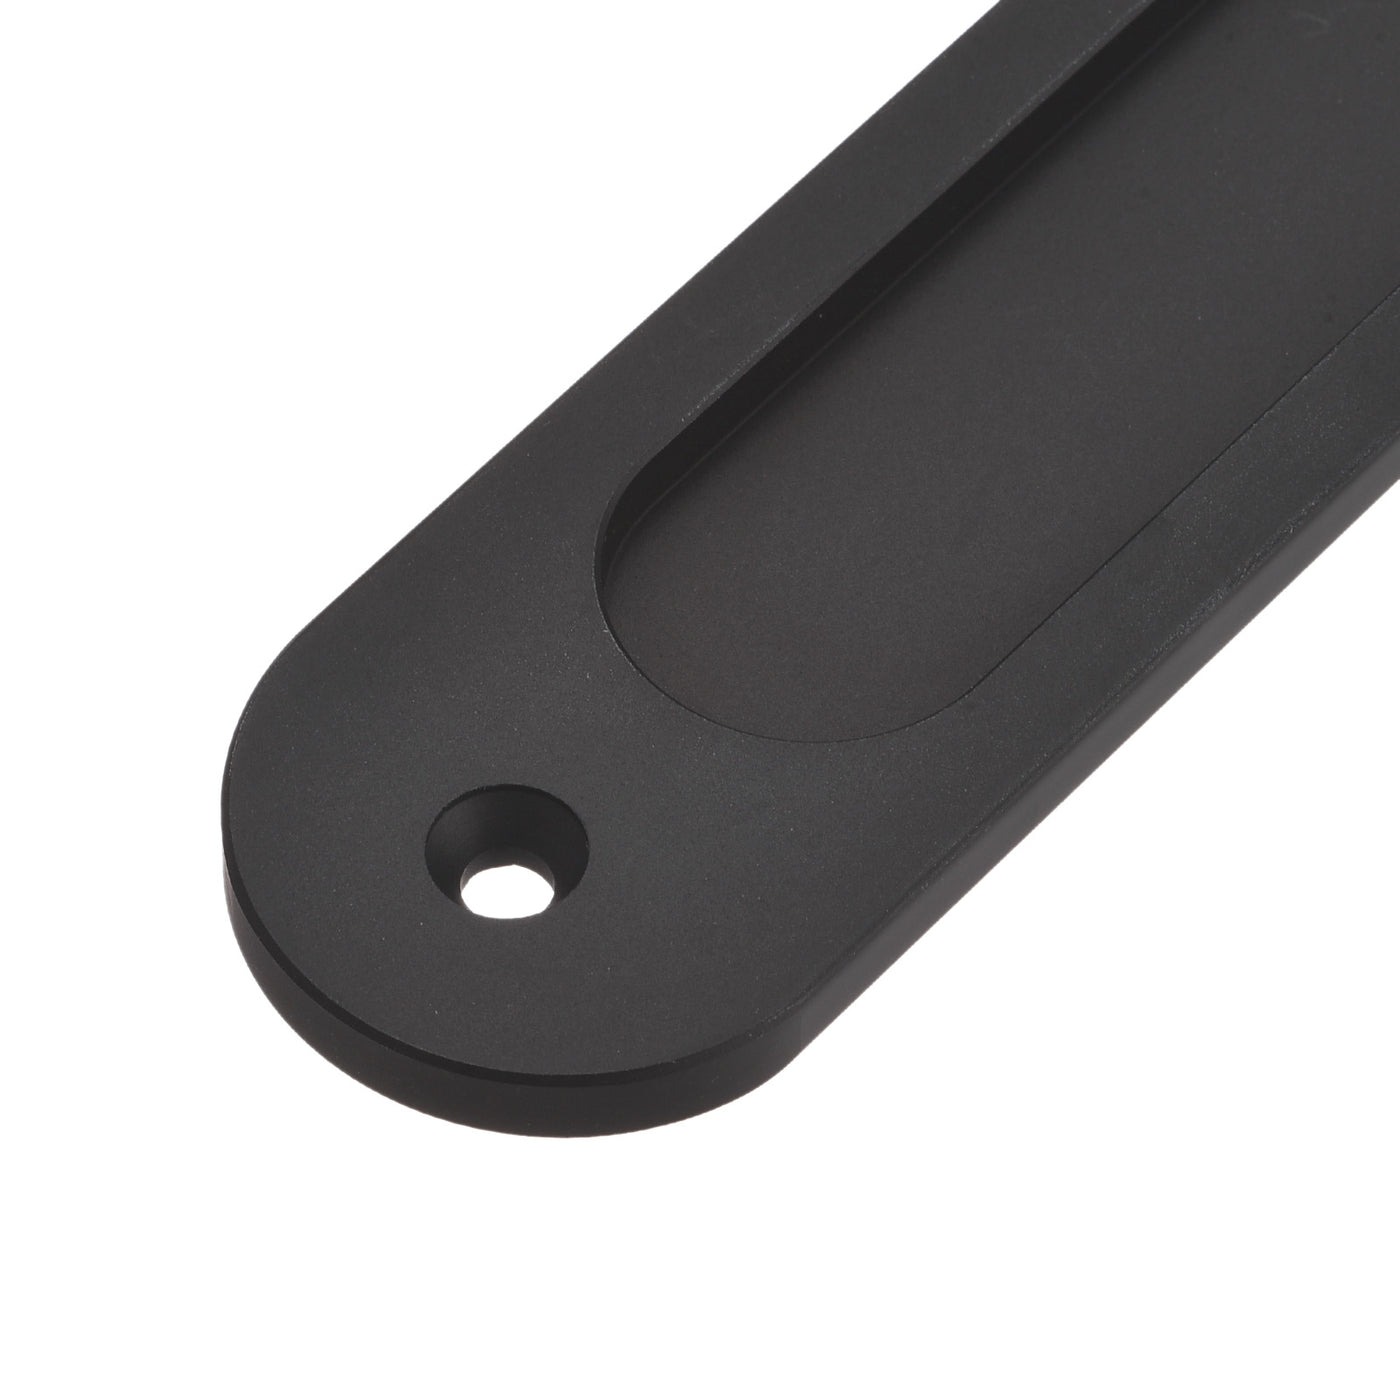 uxcell Uxcell Finger Flush Pull Handle 180x40x5.7mm Oval for Drawer Door Black 2pcs